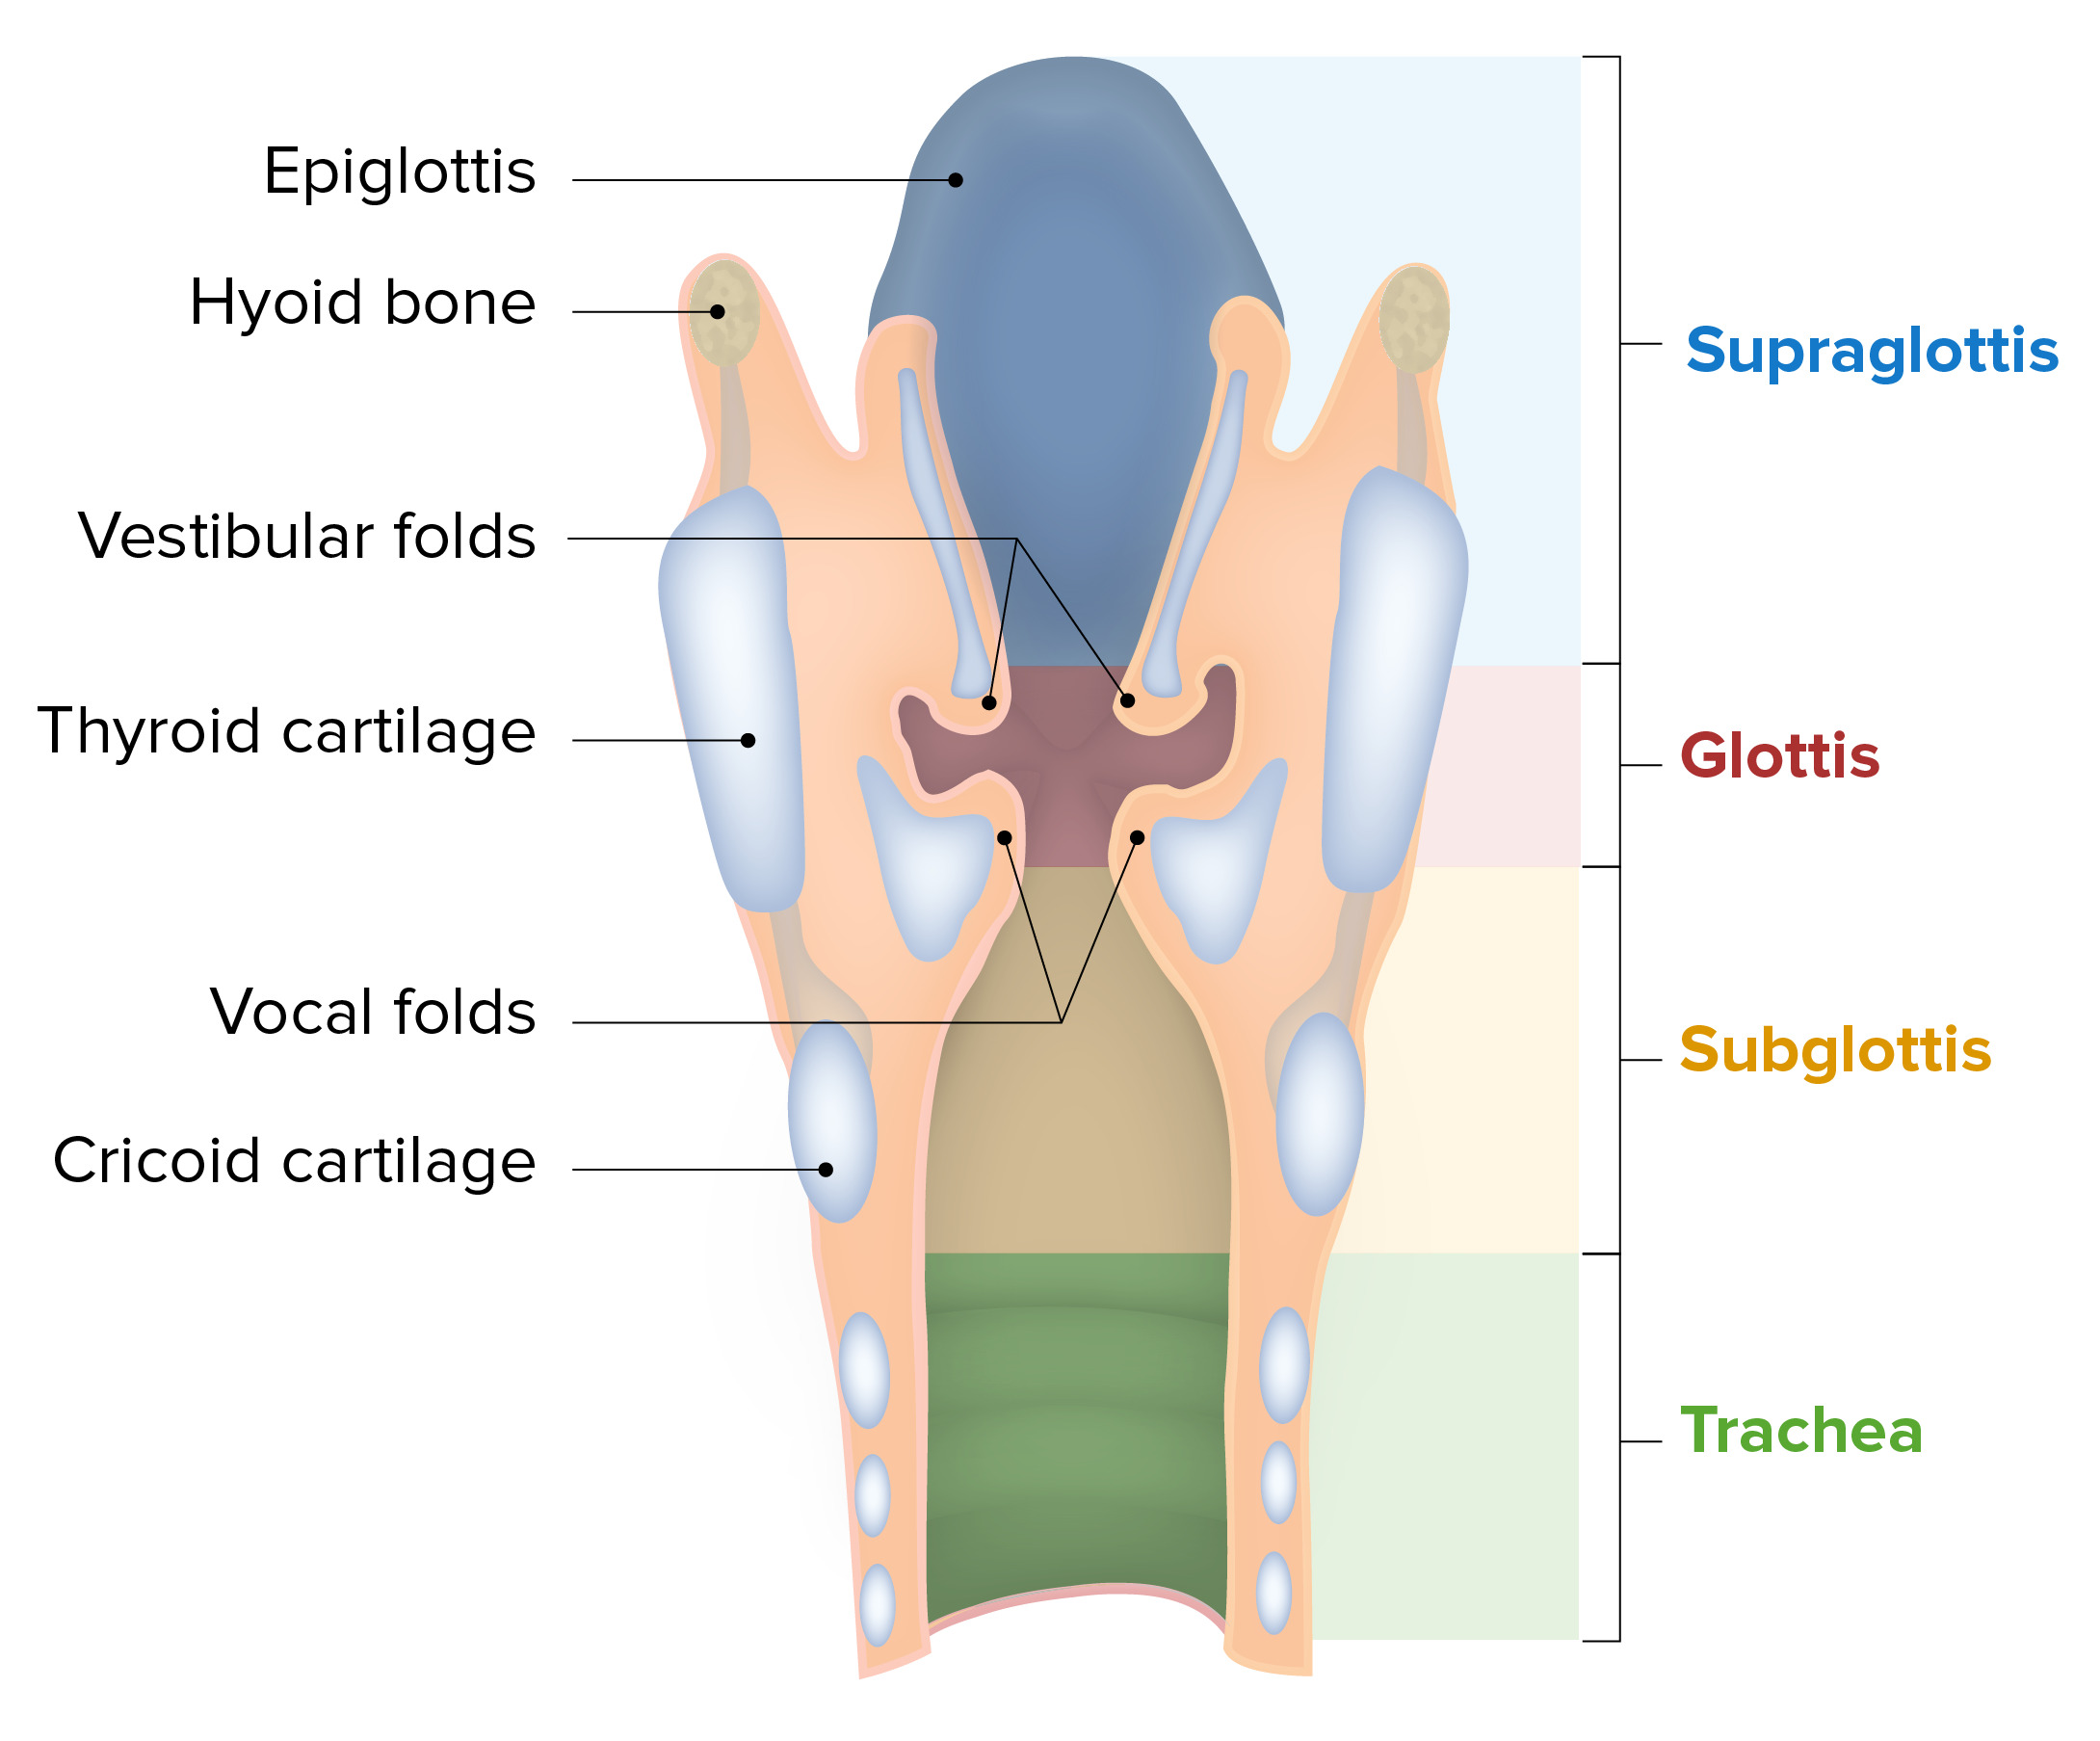 What are the major components of the larynx?